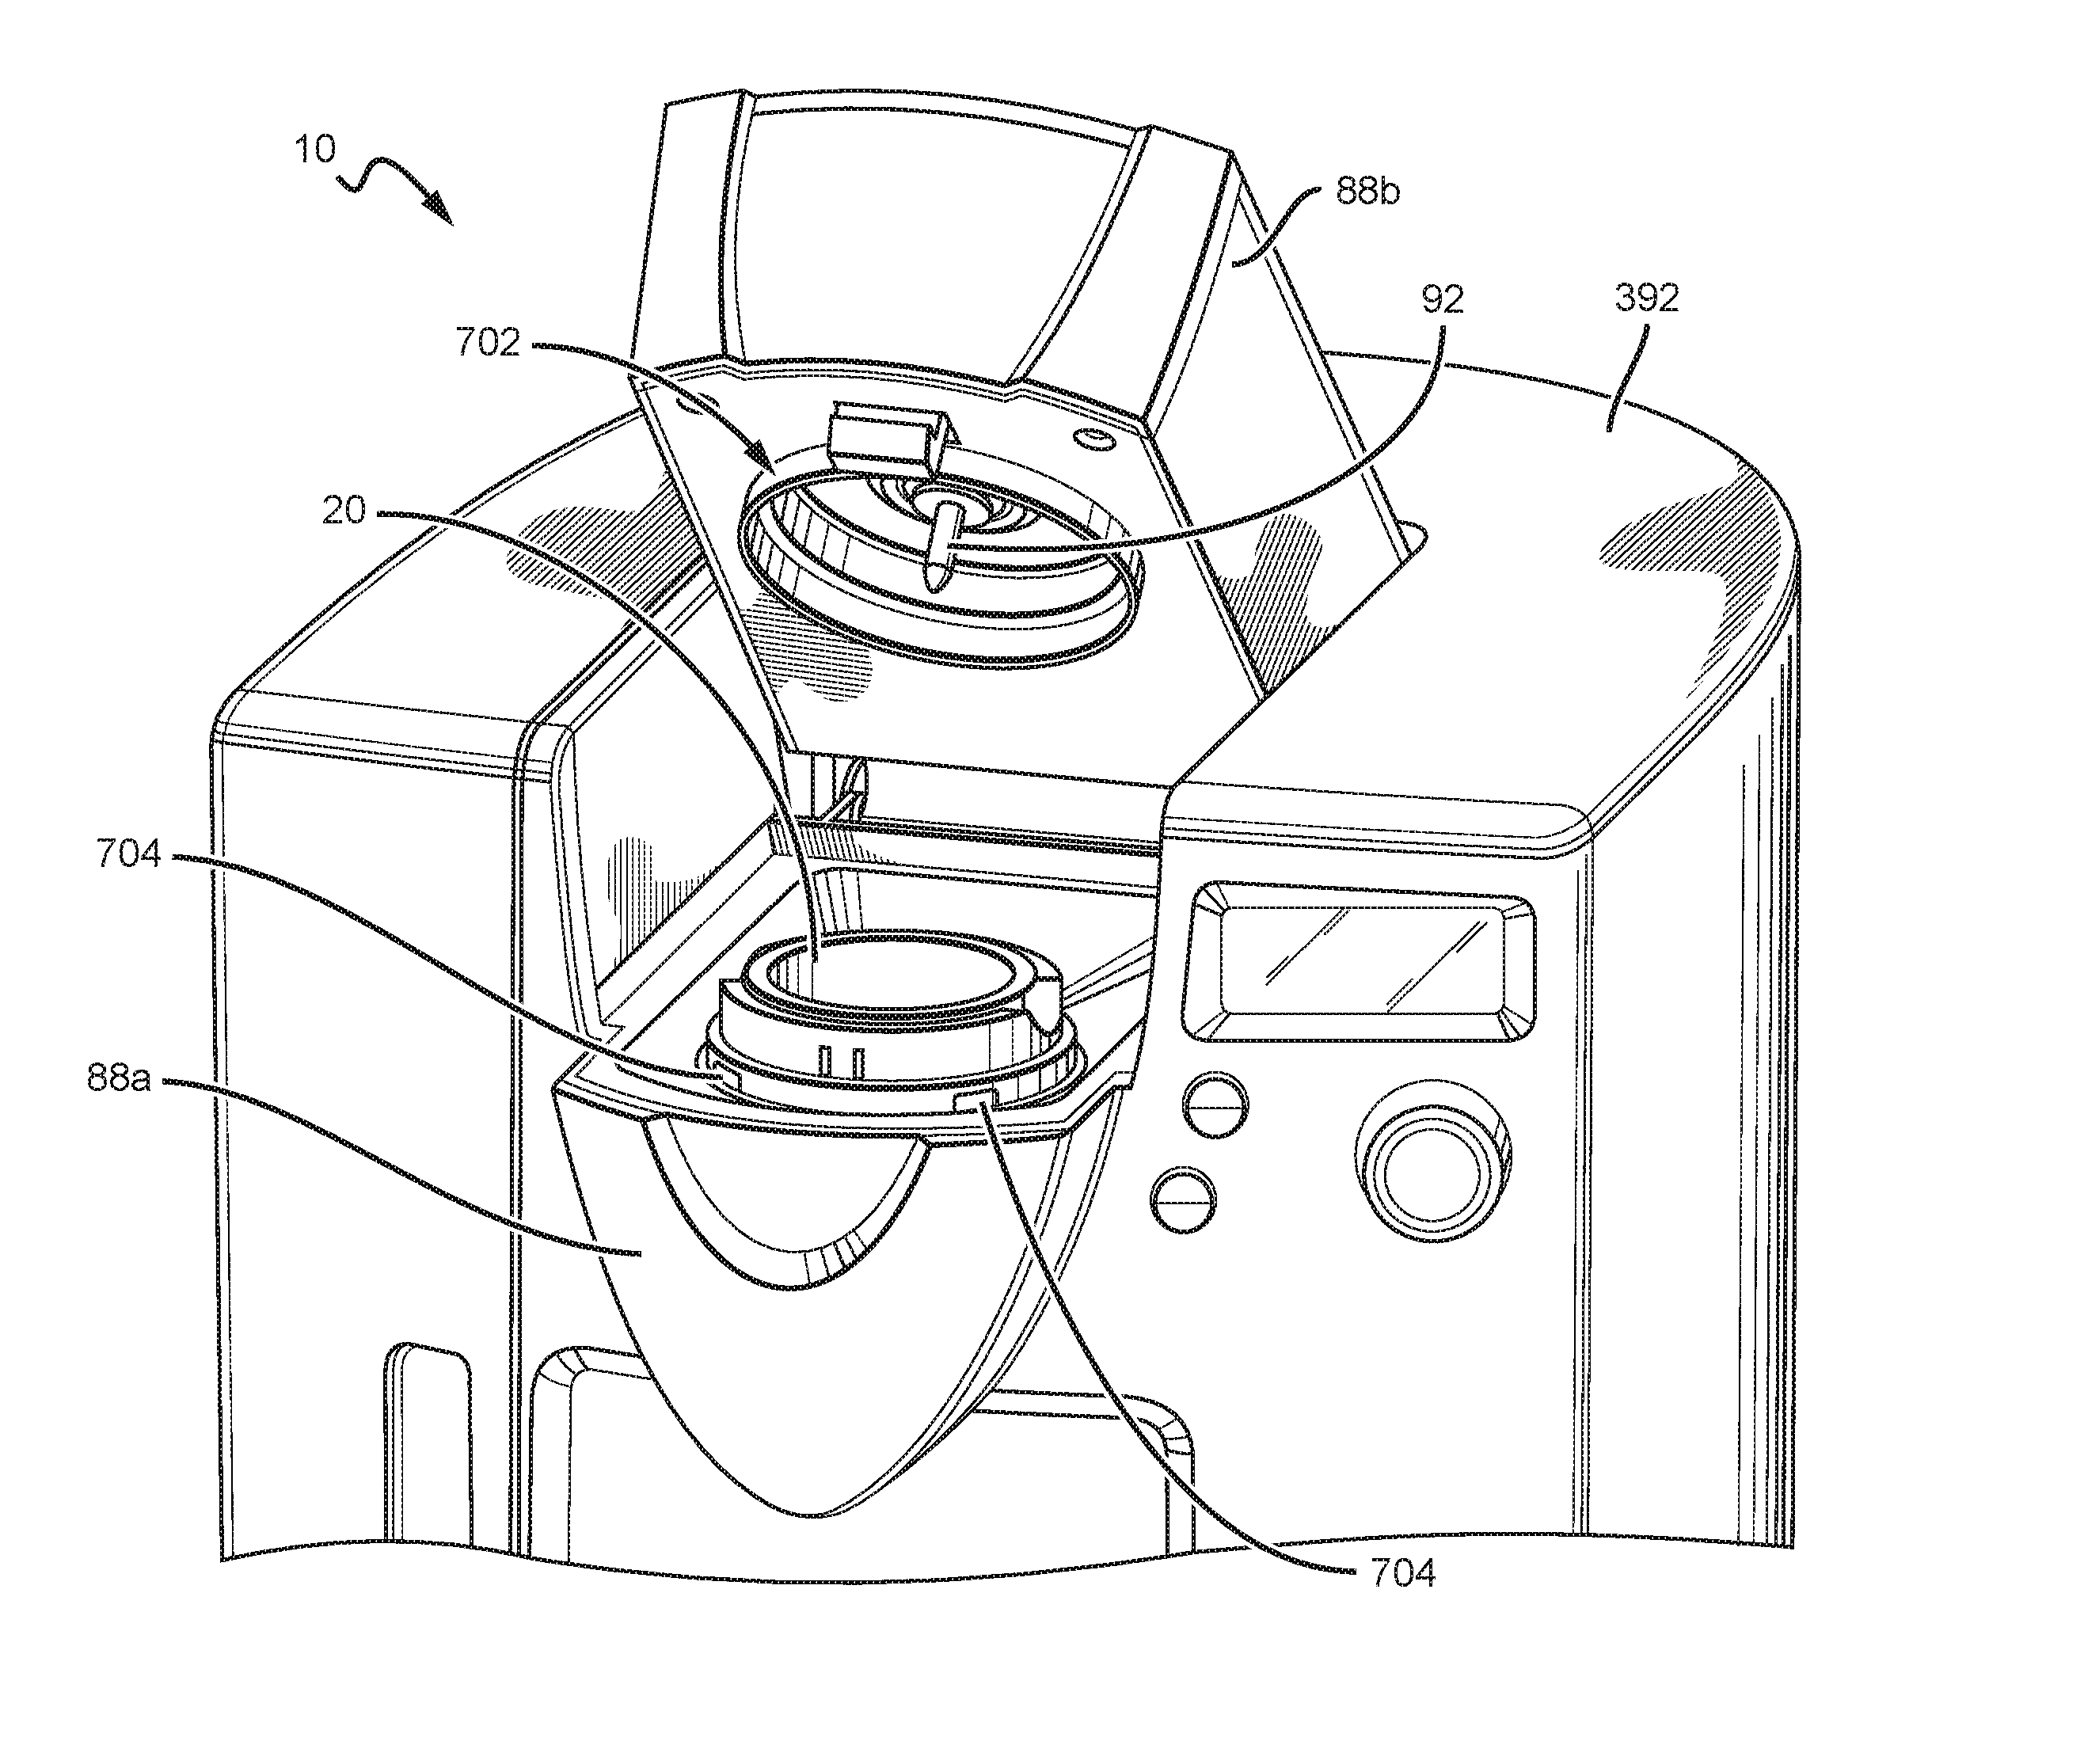 Coffee brewing system and method of using the same